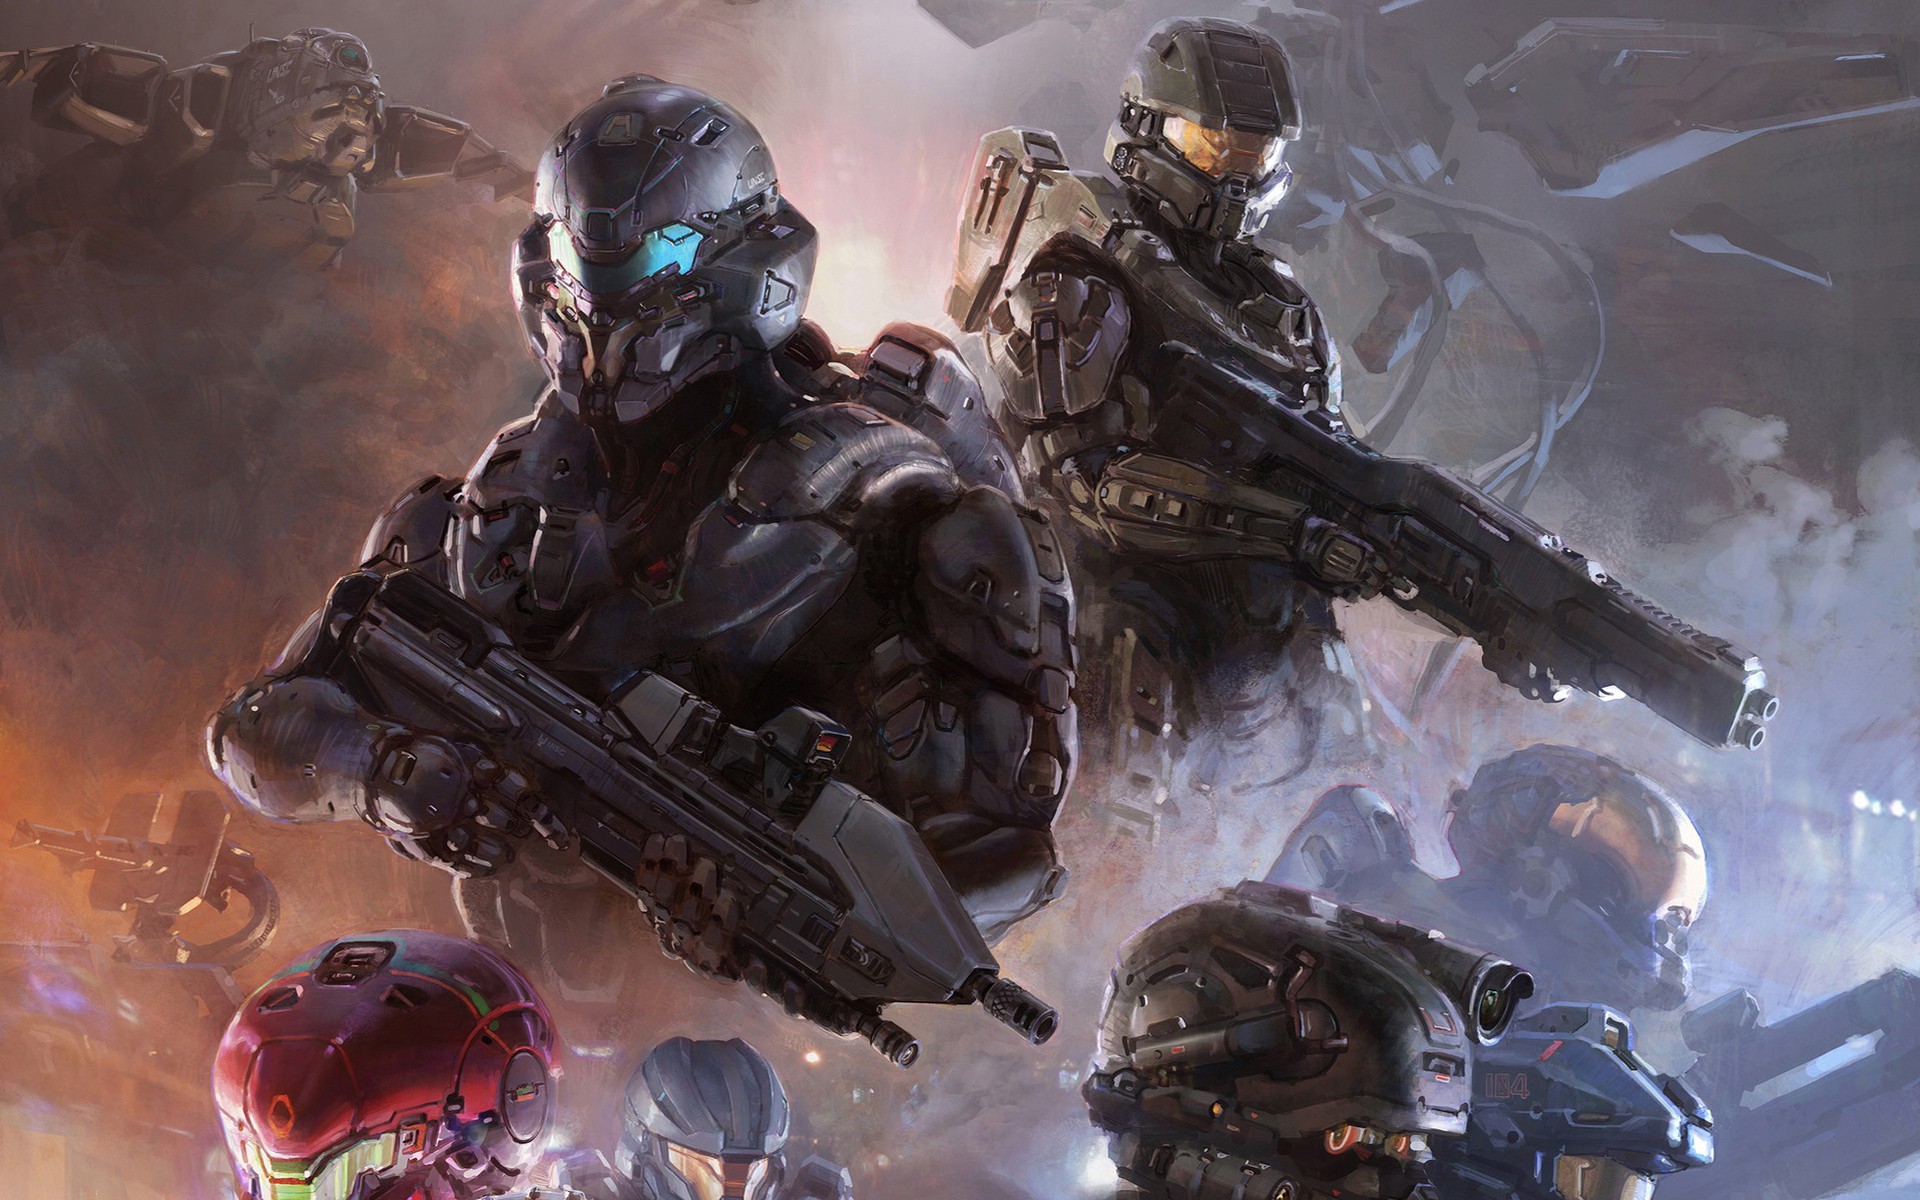 General 1920x1200 Halo 5: Guardians artwork video games science fiction video game art